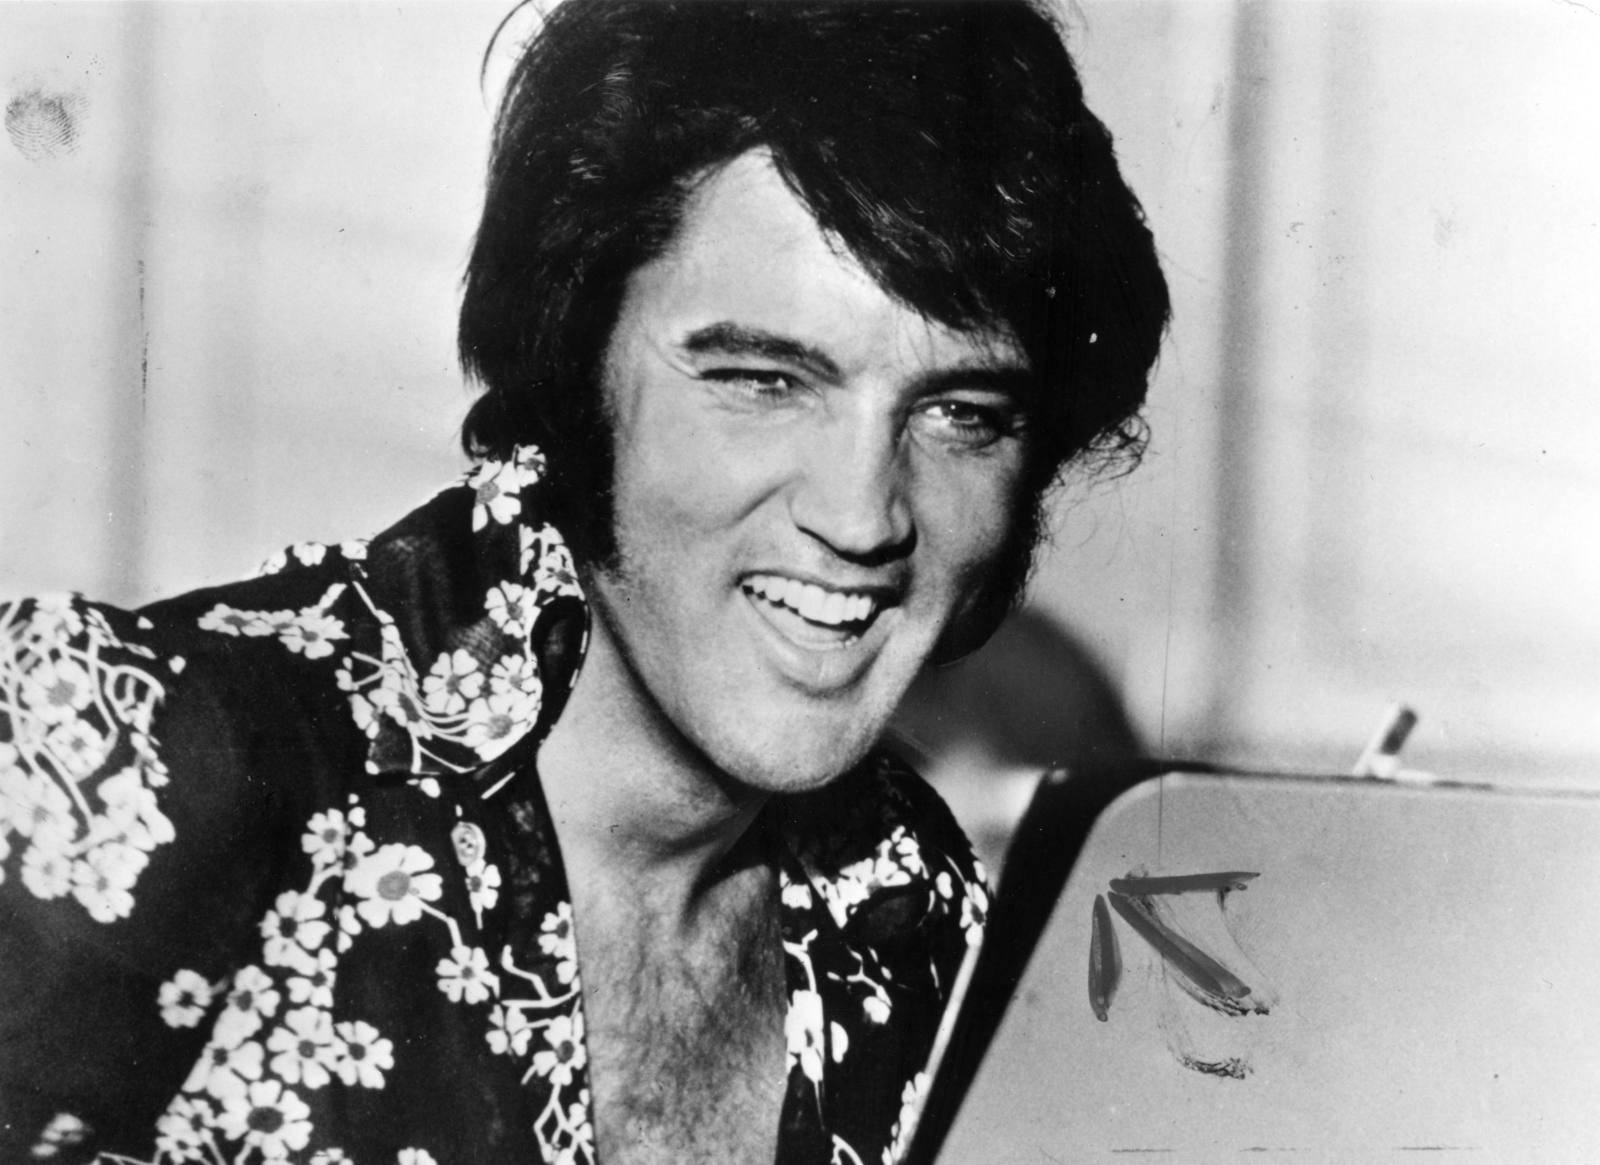 Elvis Presley 80th birthday: 10 unusual facts about the king of rock'n'roll